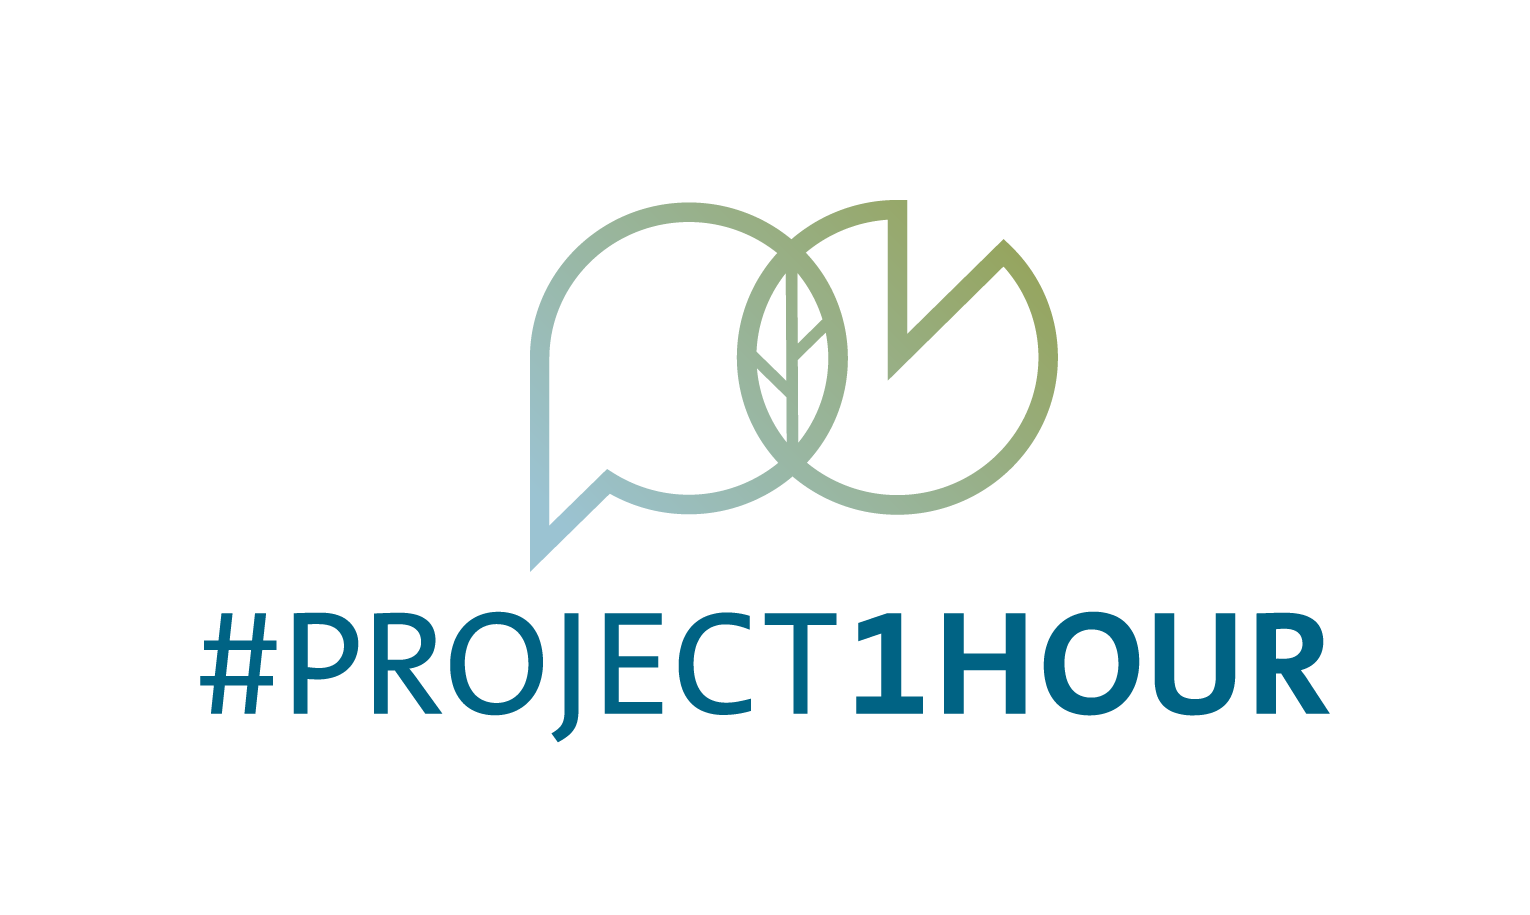 #Project1Hour